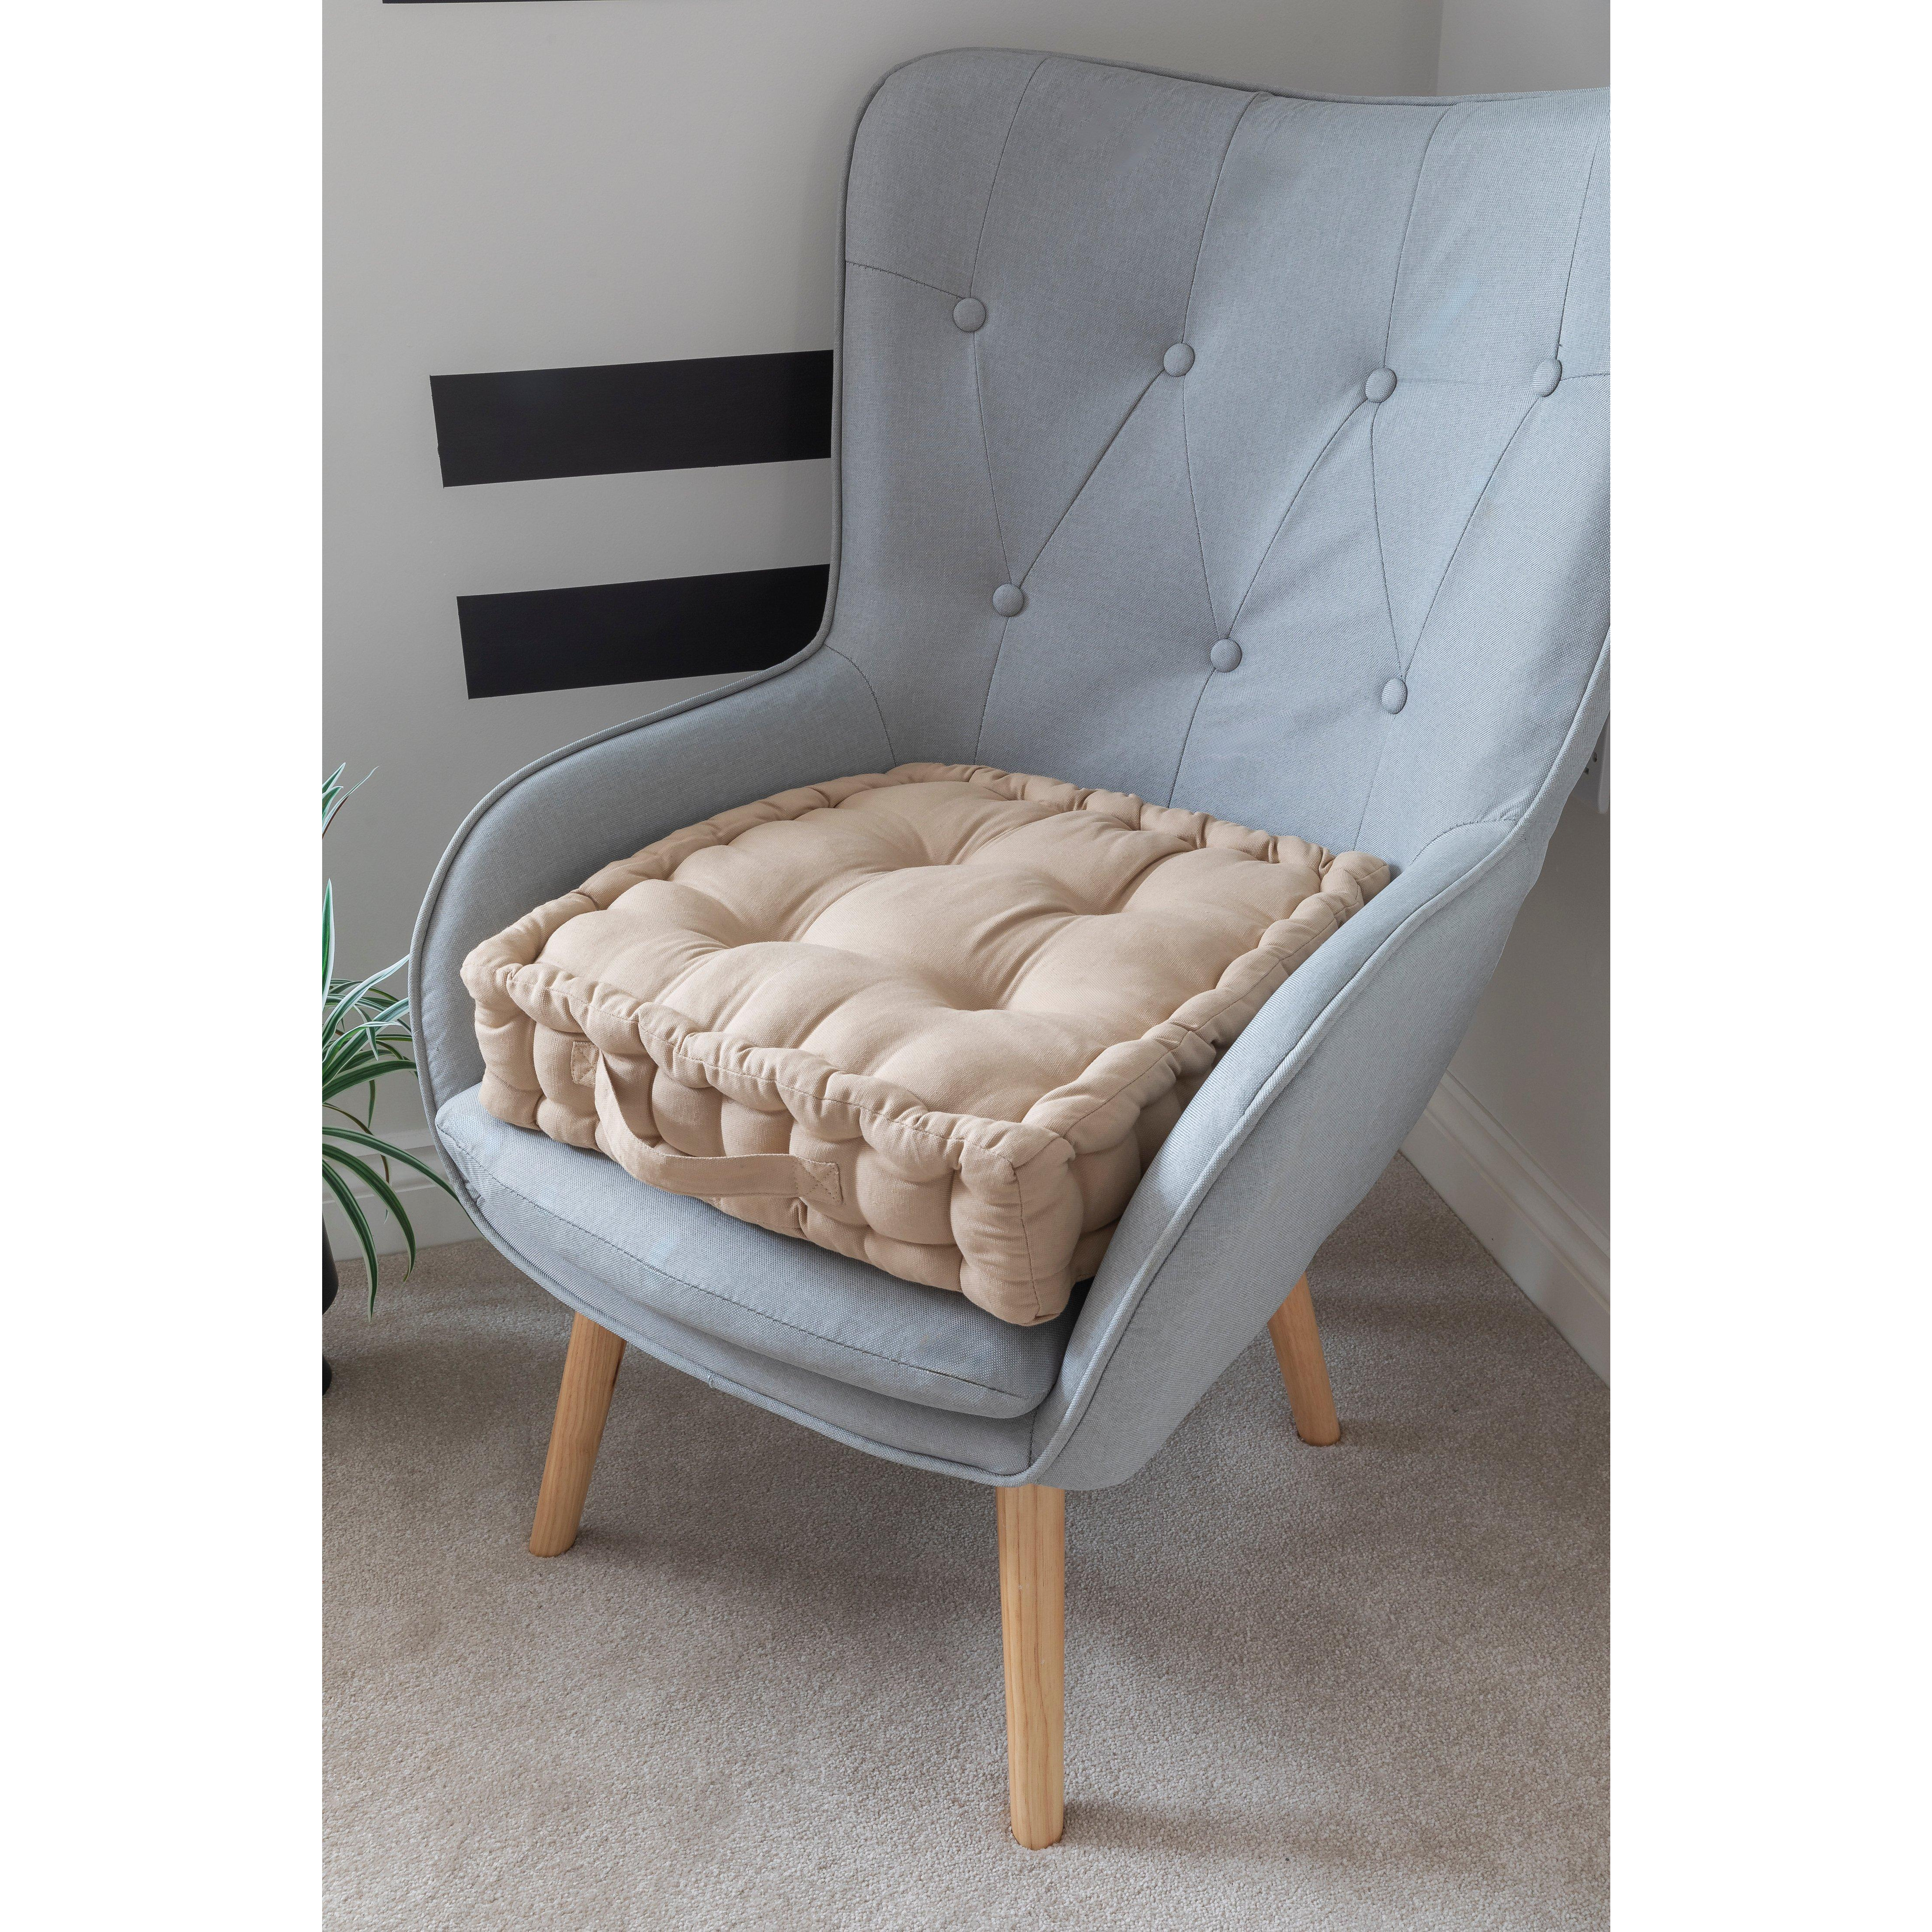 Chunky Booster Cushion - image 1